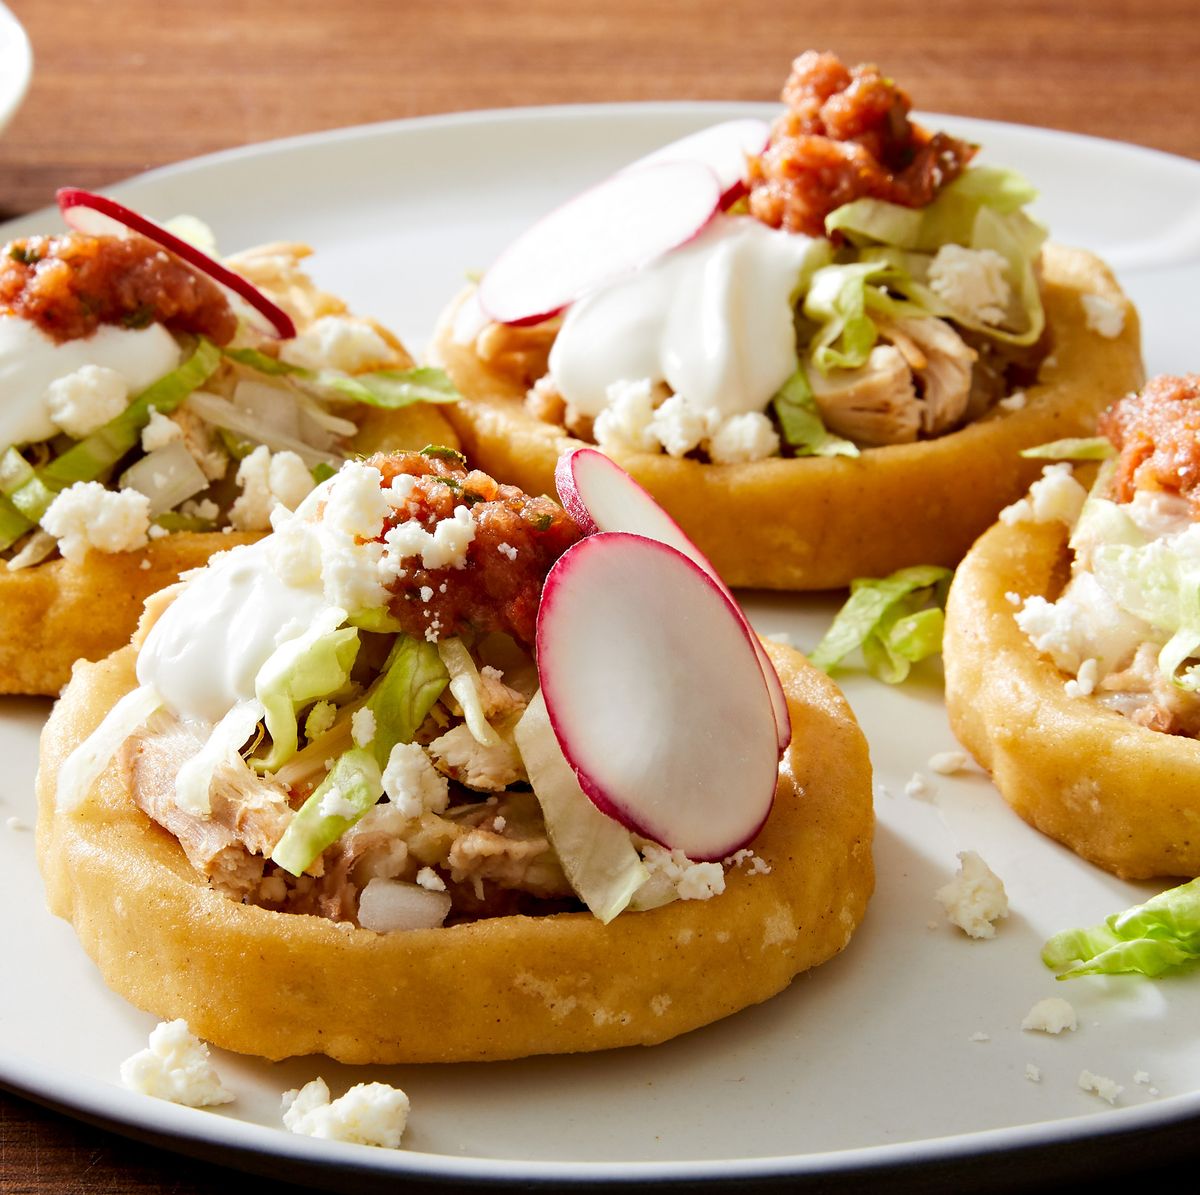 Best Sopes Recipe - How To Make Sopes - The Tech Edvocate